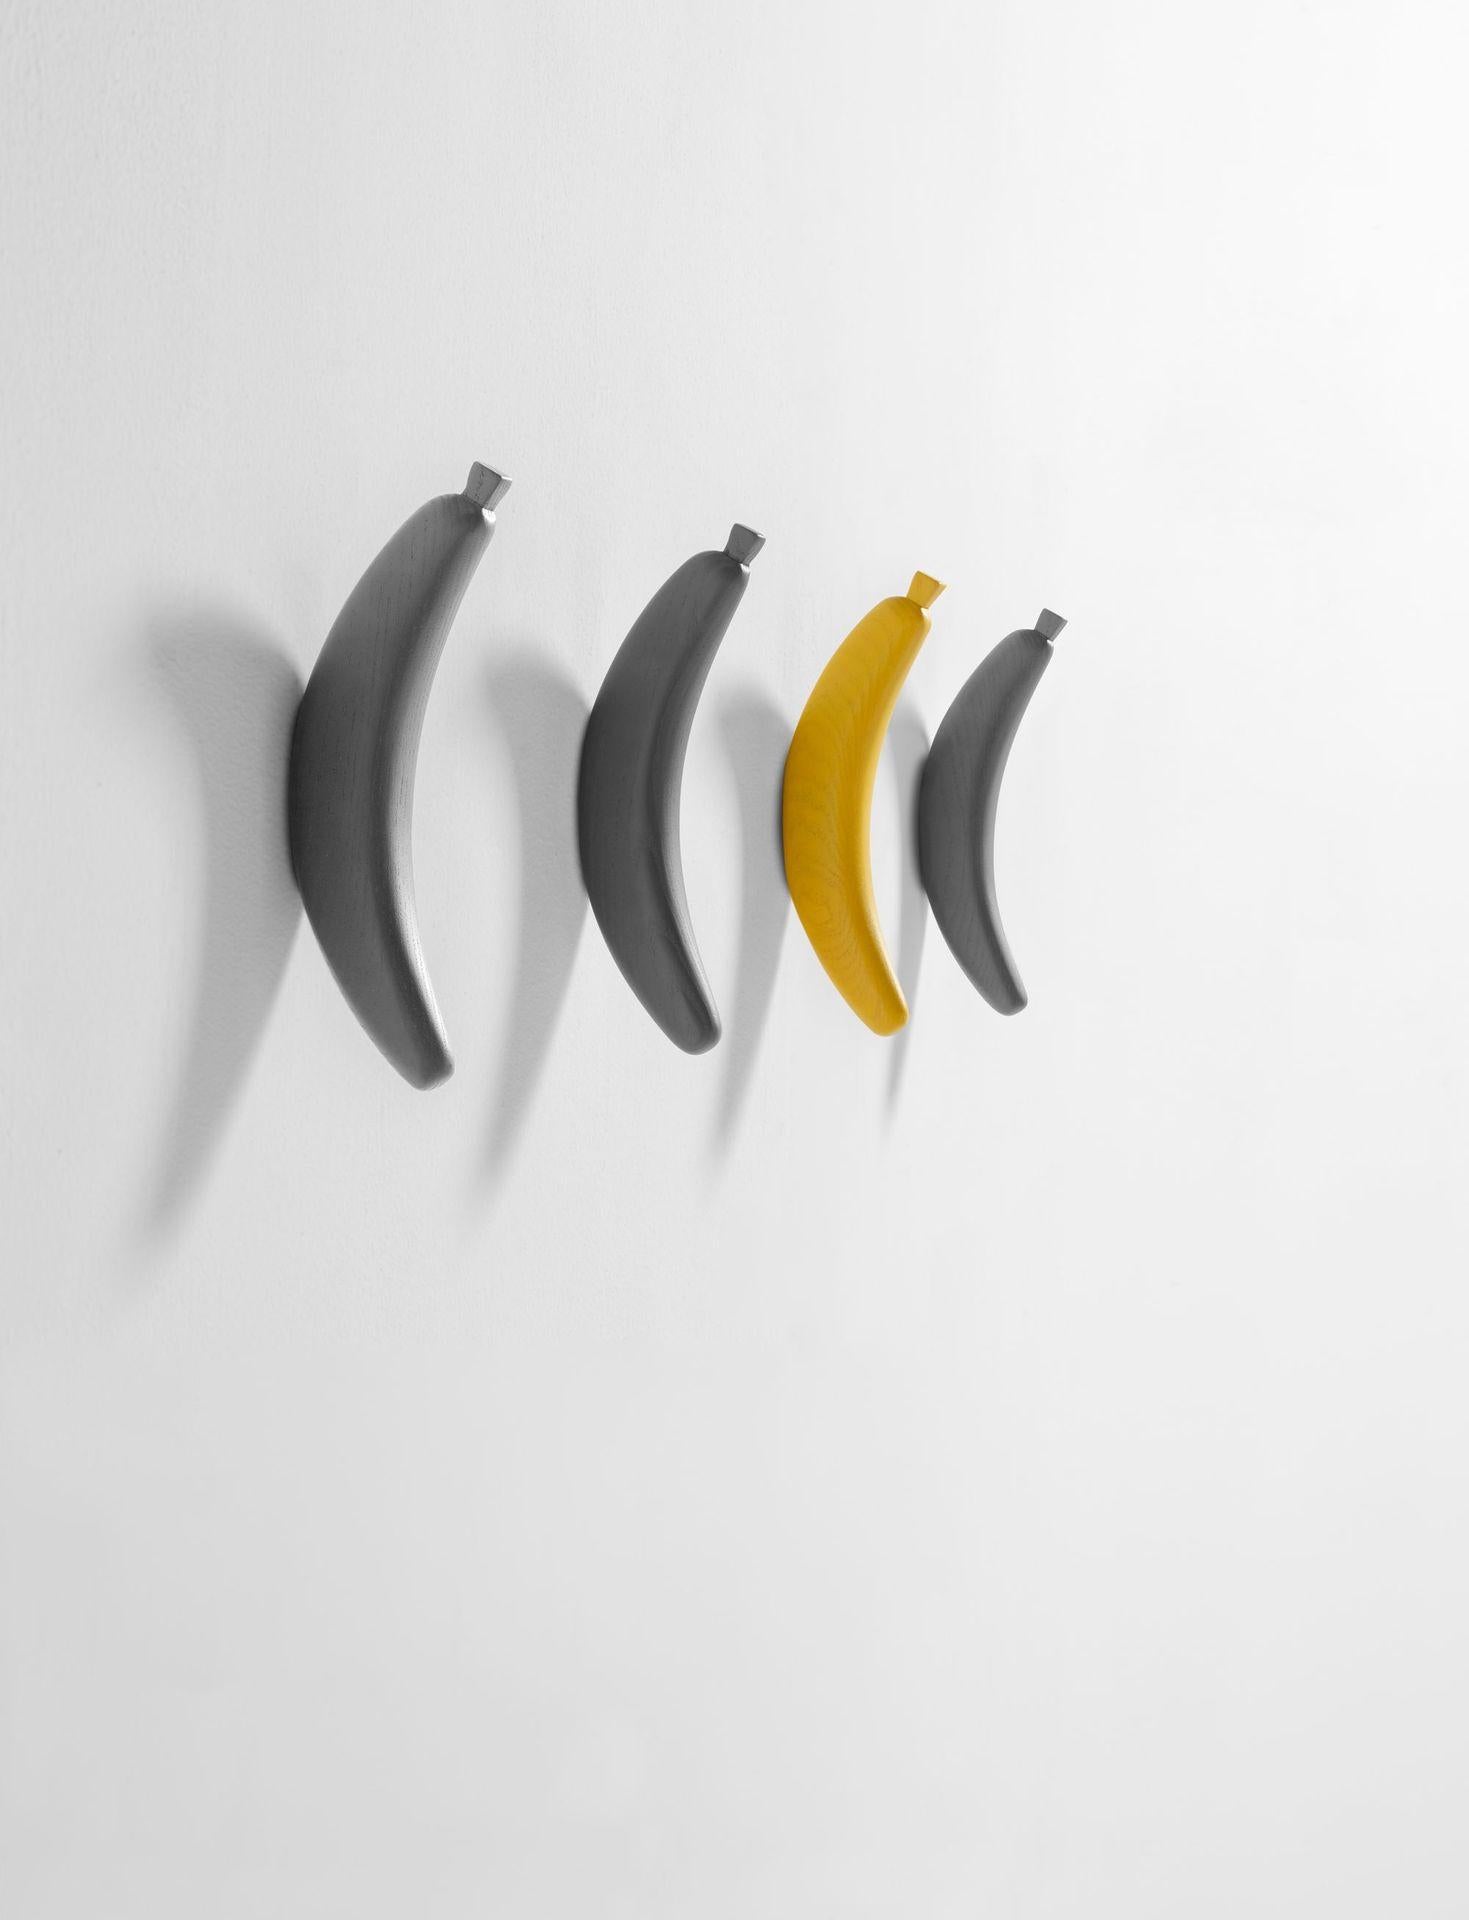 Set of 4 monkey banana wall hangers by Jaime Hayon
Dimensions: D4 x 8 x H23 cm 
Materials: Ash
Also available in different colours: grey, black or yellow

«We all want what can fall from above to be something good. For me, there’s nothing